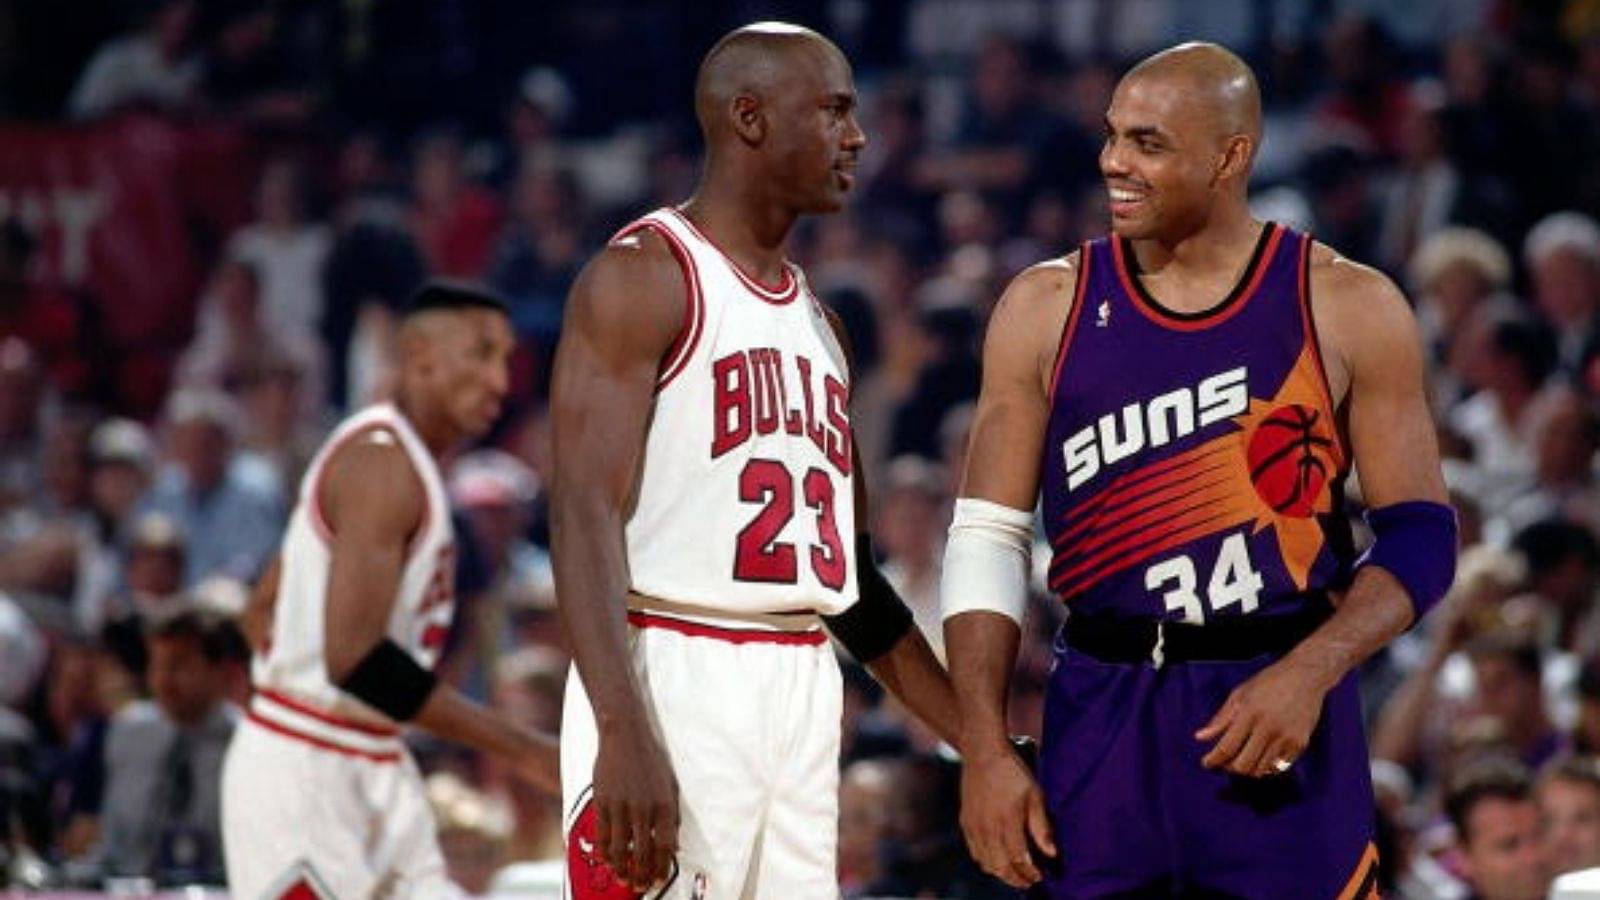 "I don’t know about you guys, I’m only packing one suit": When Michael Jordan declared that there wasn't going to be a Game 7 against Charles Barkley's Suns in 1993 Finals